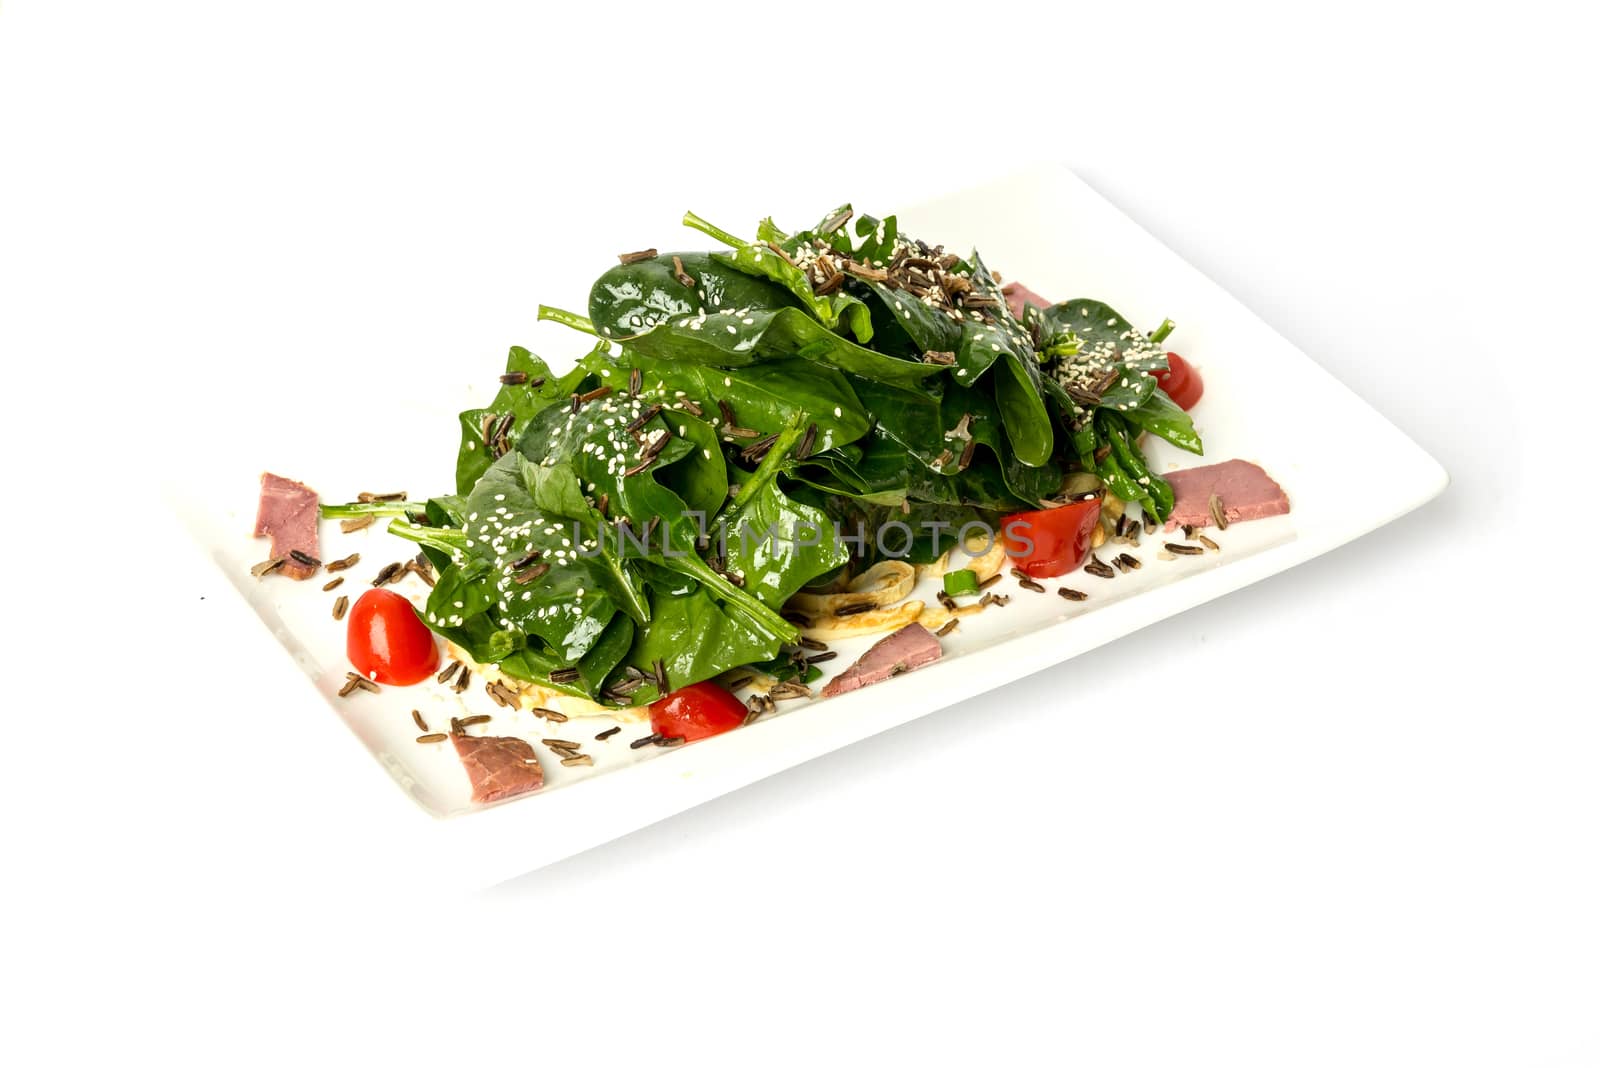 Arugula and spinach salad with tomato and cedar nuts